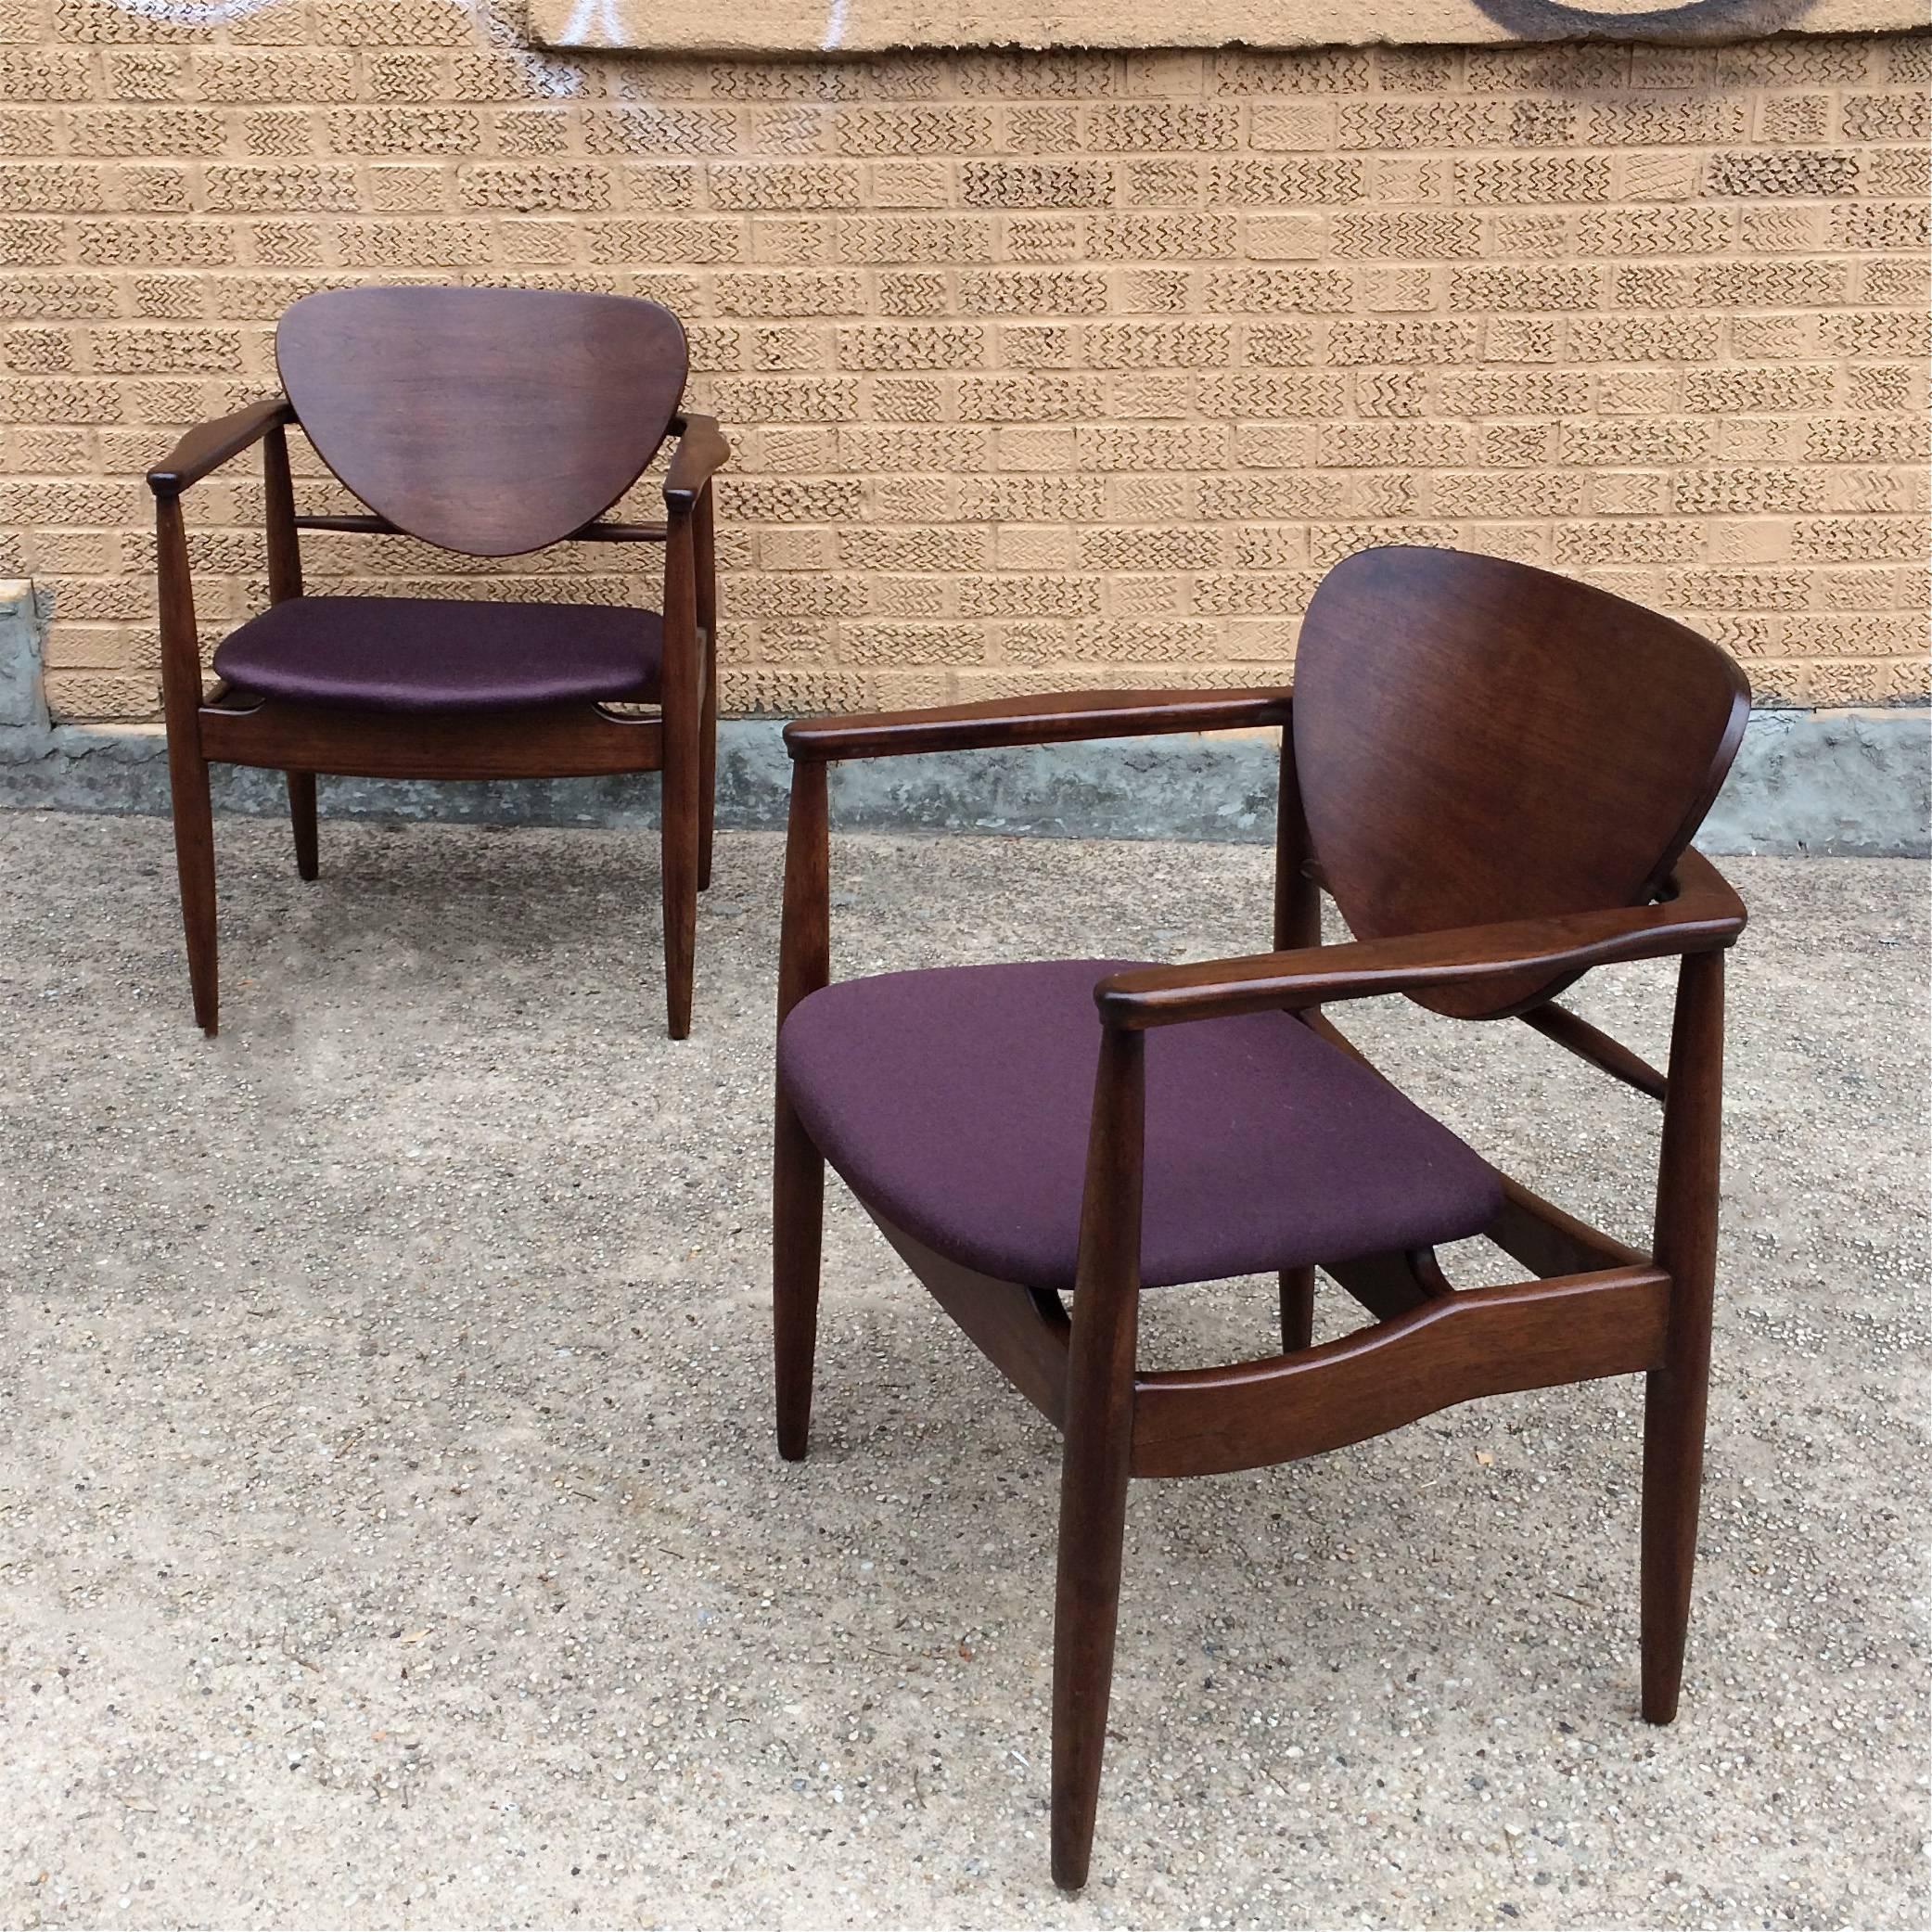 Pair of sculptural, walnut armchairs by Finn Juhl for John Stuart feature floating seats and backs upholstered in aubergine linen.